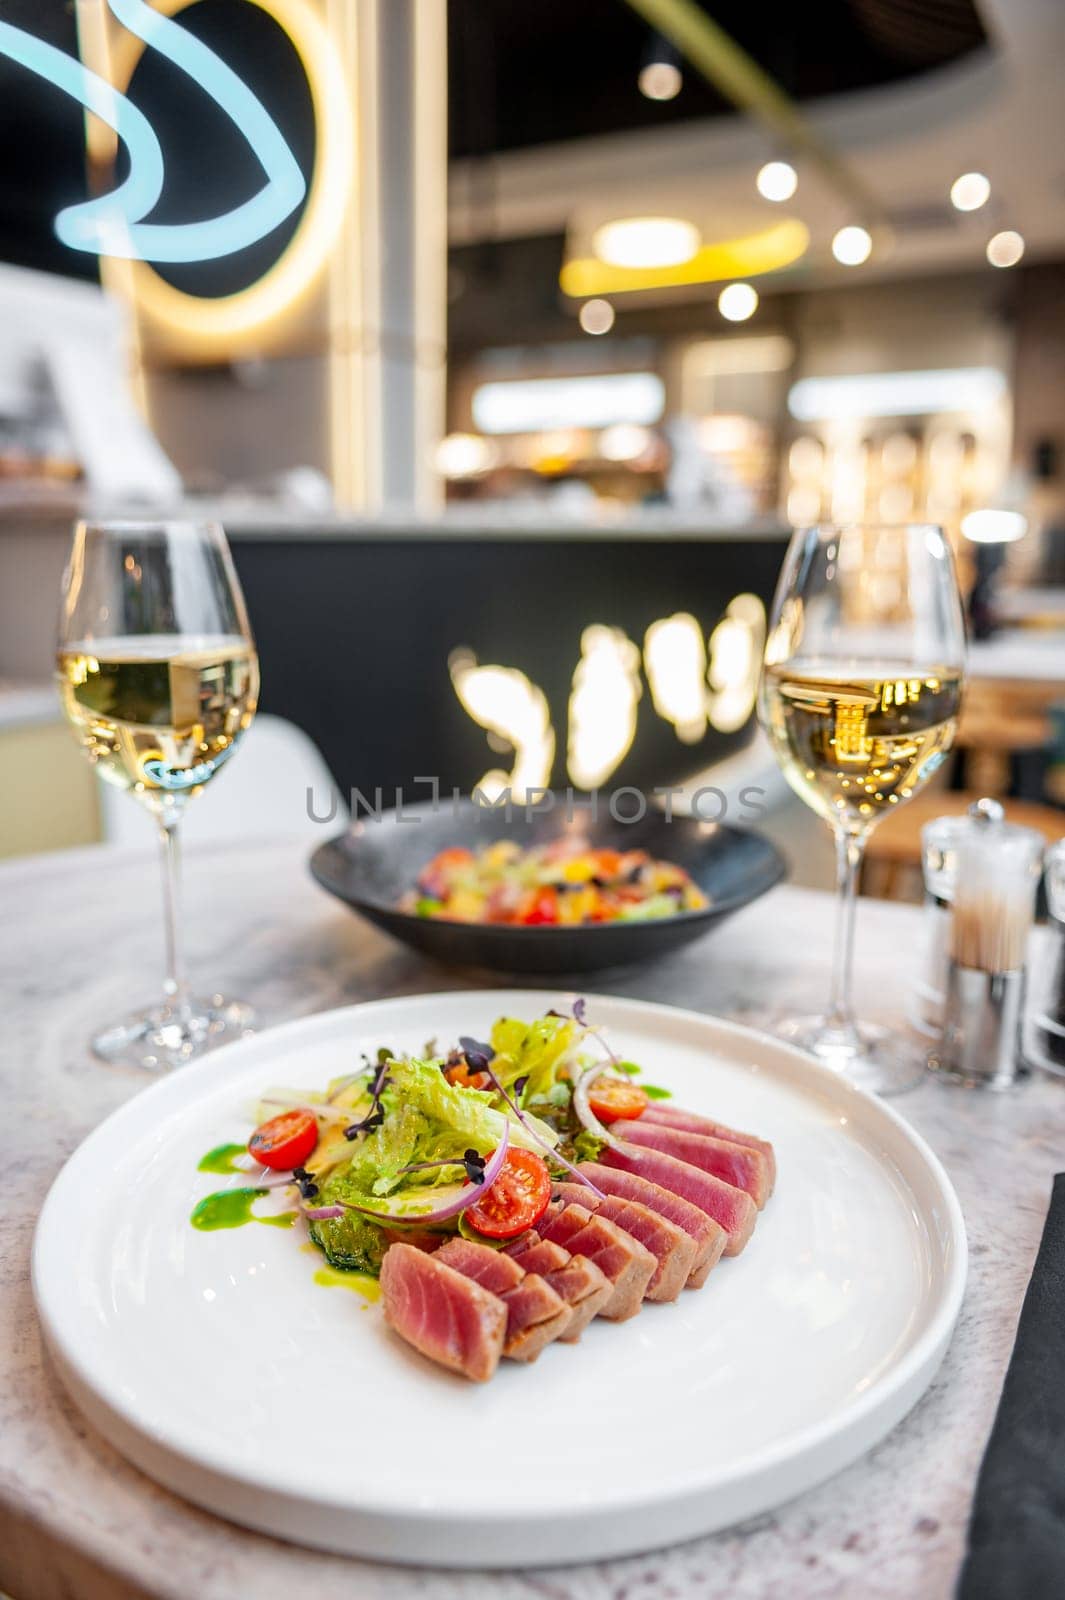 Tuna tataki salad with lettuce, cherry tomatoes and avocado on a marble table in a restaurant. High quality photo